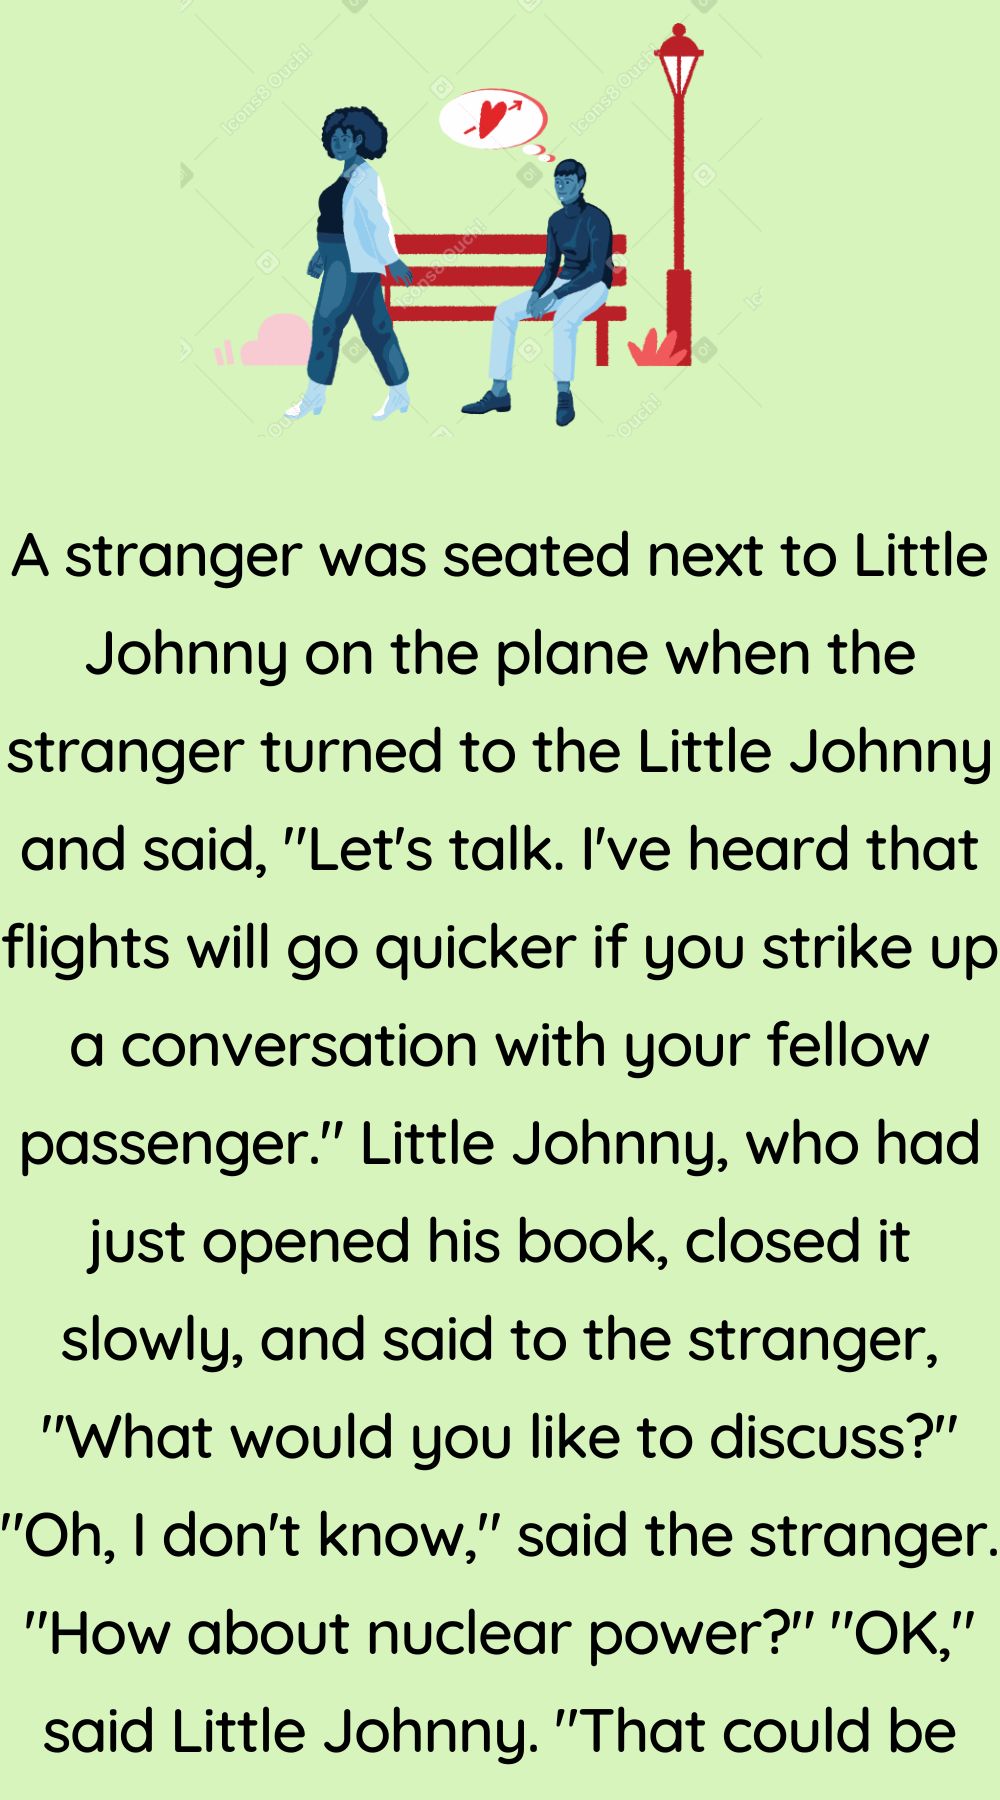 A stranger was seated next to Little Johnny